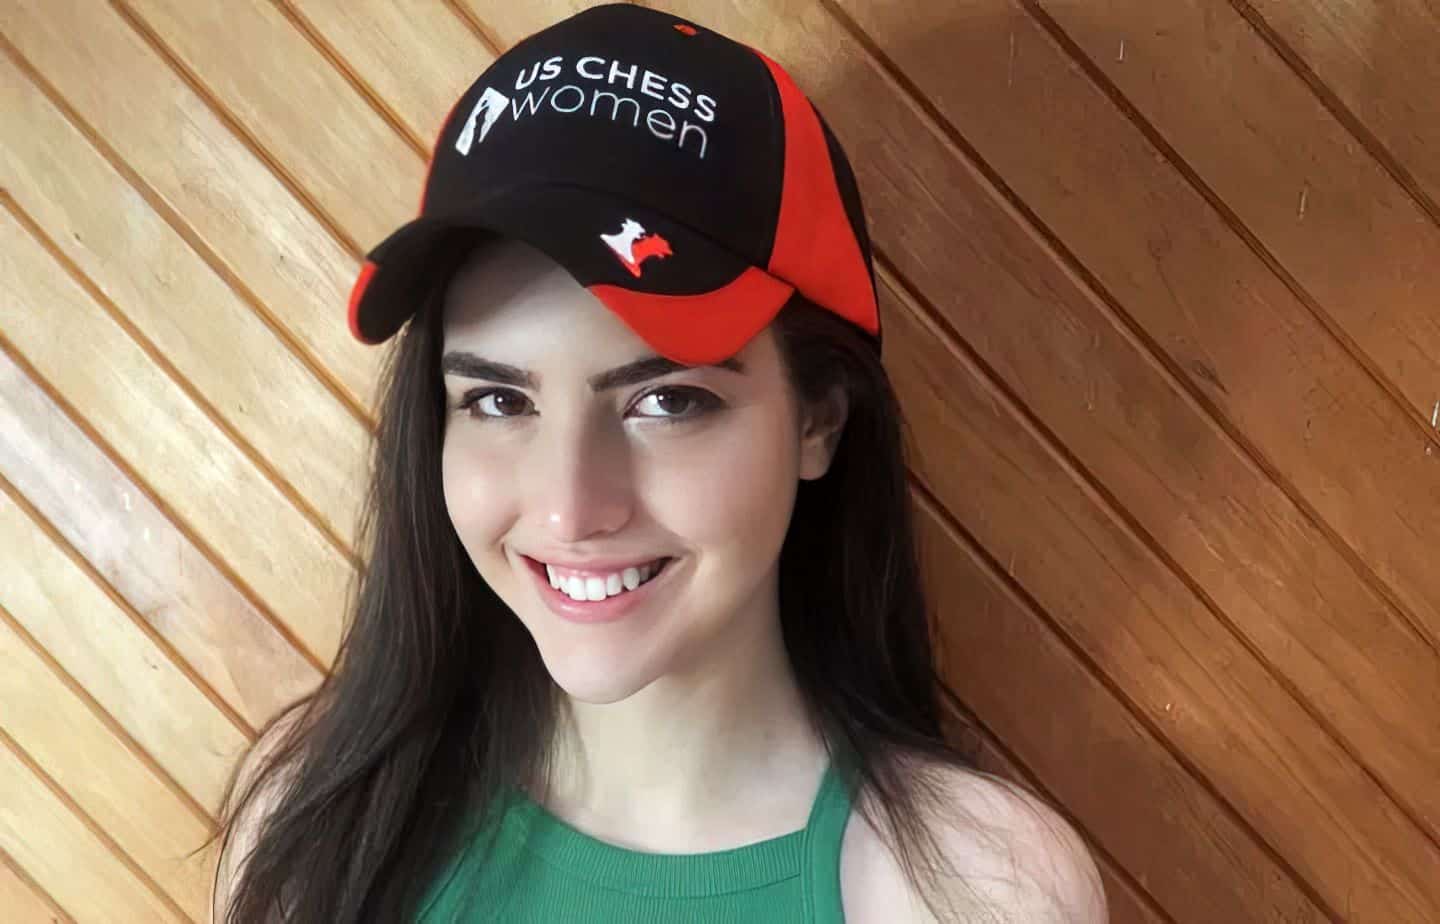 Andrea quit duck chess after this #botez #chess #streamer #twitch #